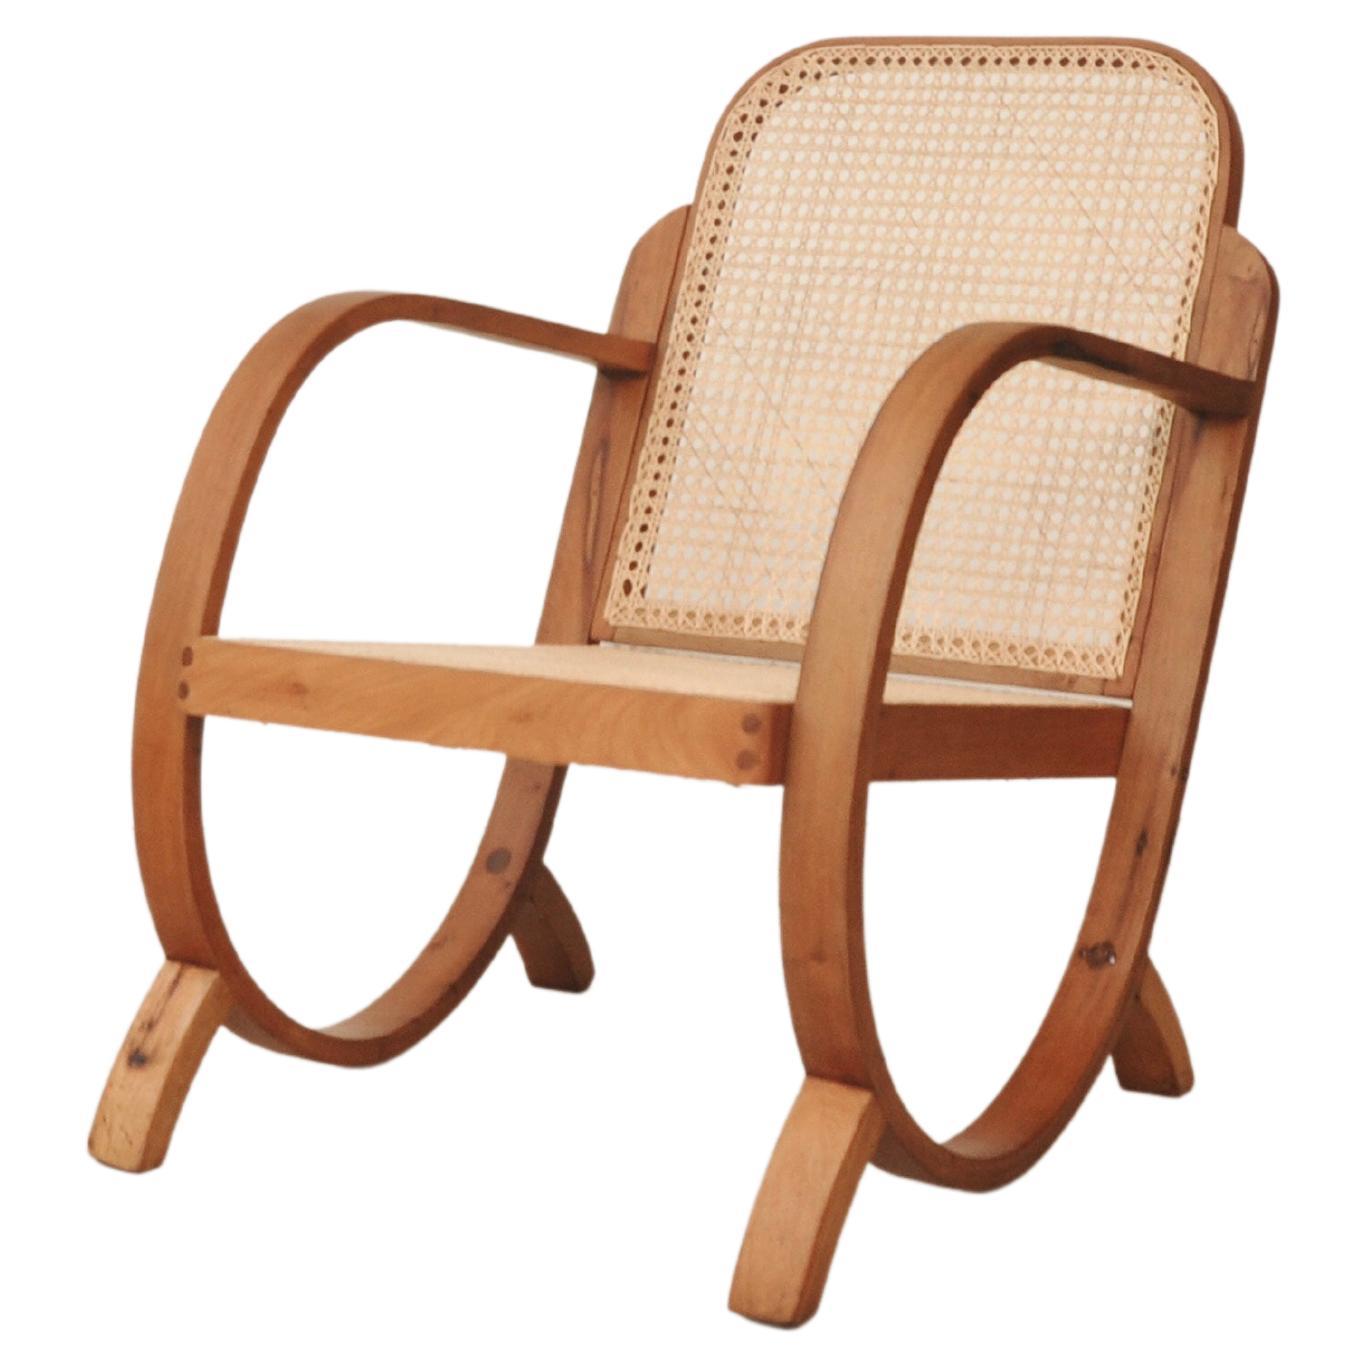 Brazilian Mid-century Armchair in Bent Wood and Cane by Gerdau